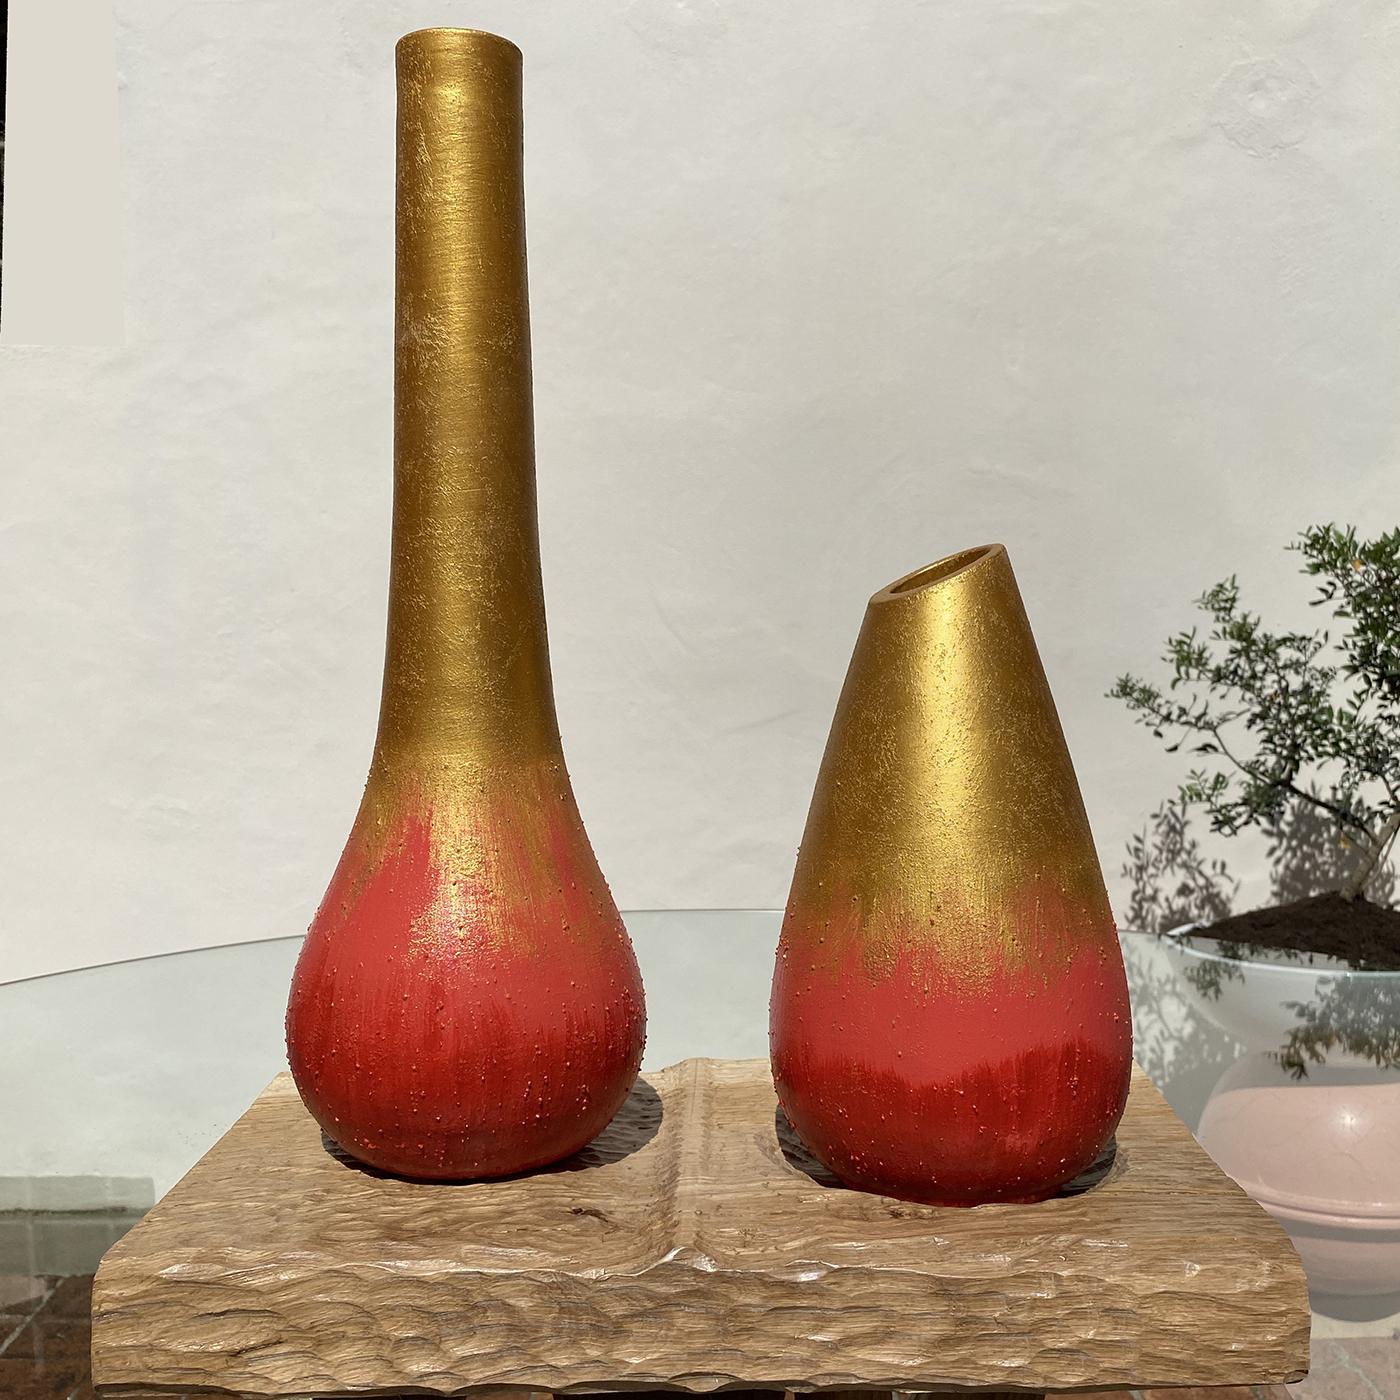 The Calafuria Uno 2 vases by Mascia Meccani comprises one tall vase with a slender neck and one shorter vase with a slanted top. Each item is hand-turned from biscuit terracotta, hand painted in red and gold. Set on a sculpted solid oak base for a